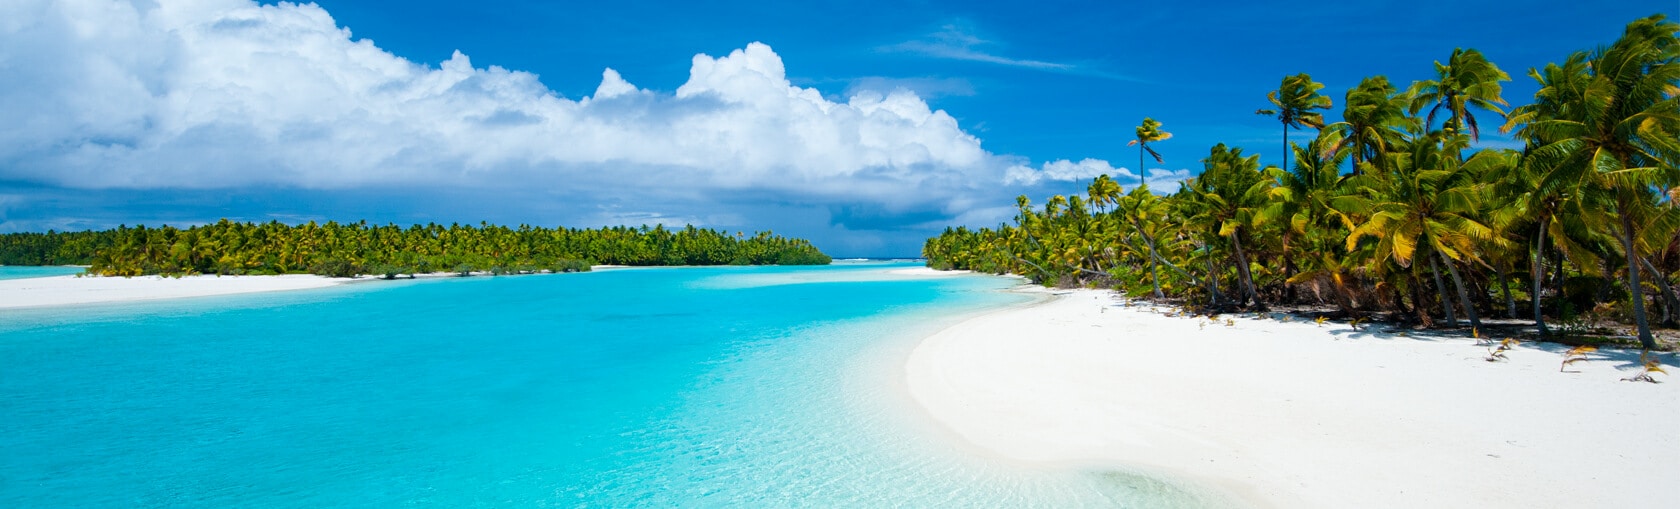 Escaping to paradise is closer than you think with a trip to the Cook Islands.